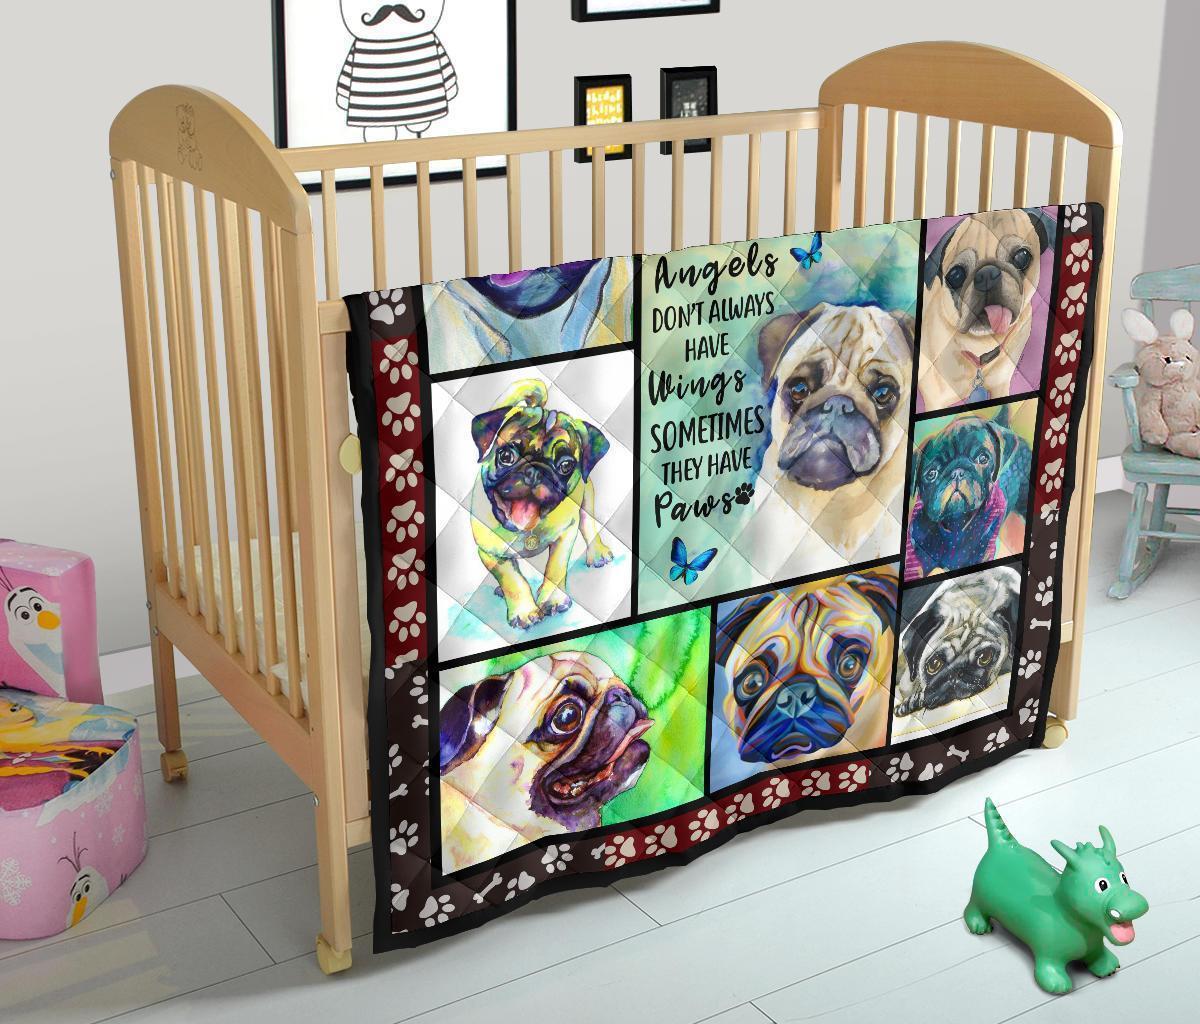 Pug Dog Quilt Blanket Angels Sometimes Have Paws-Gear Wanta